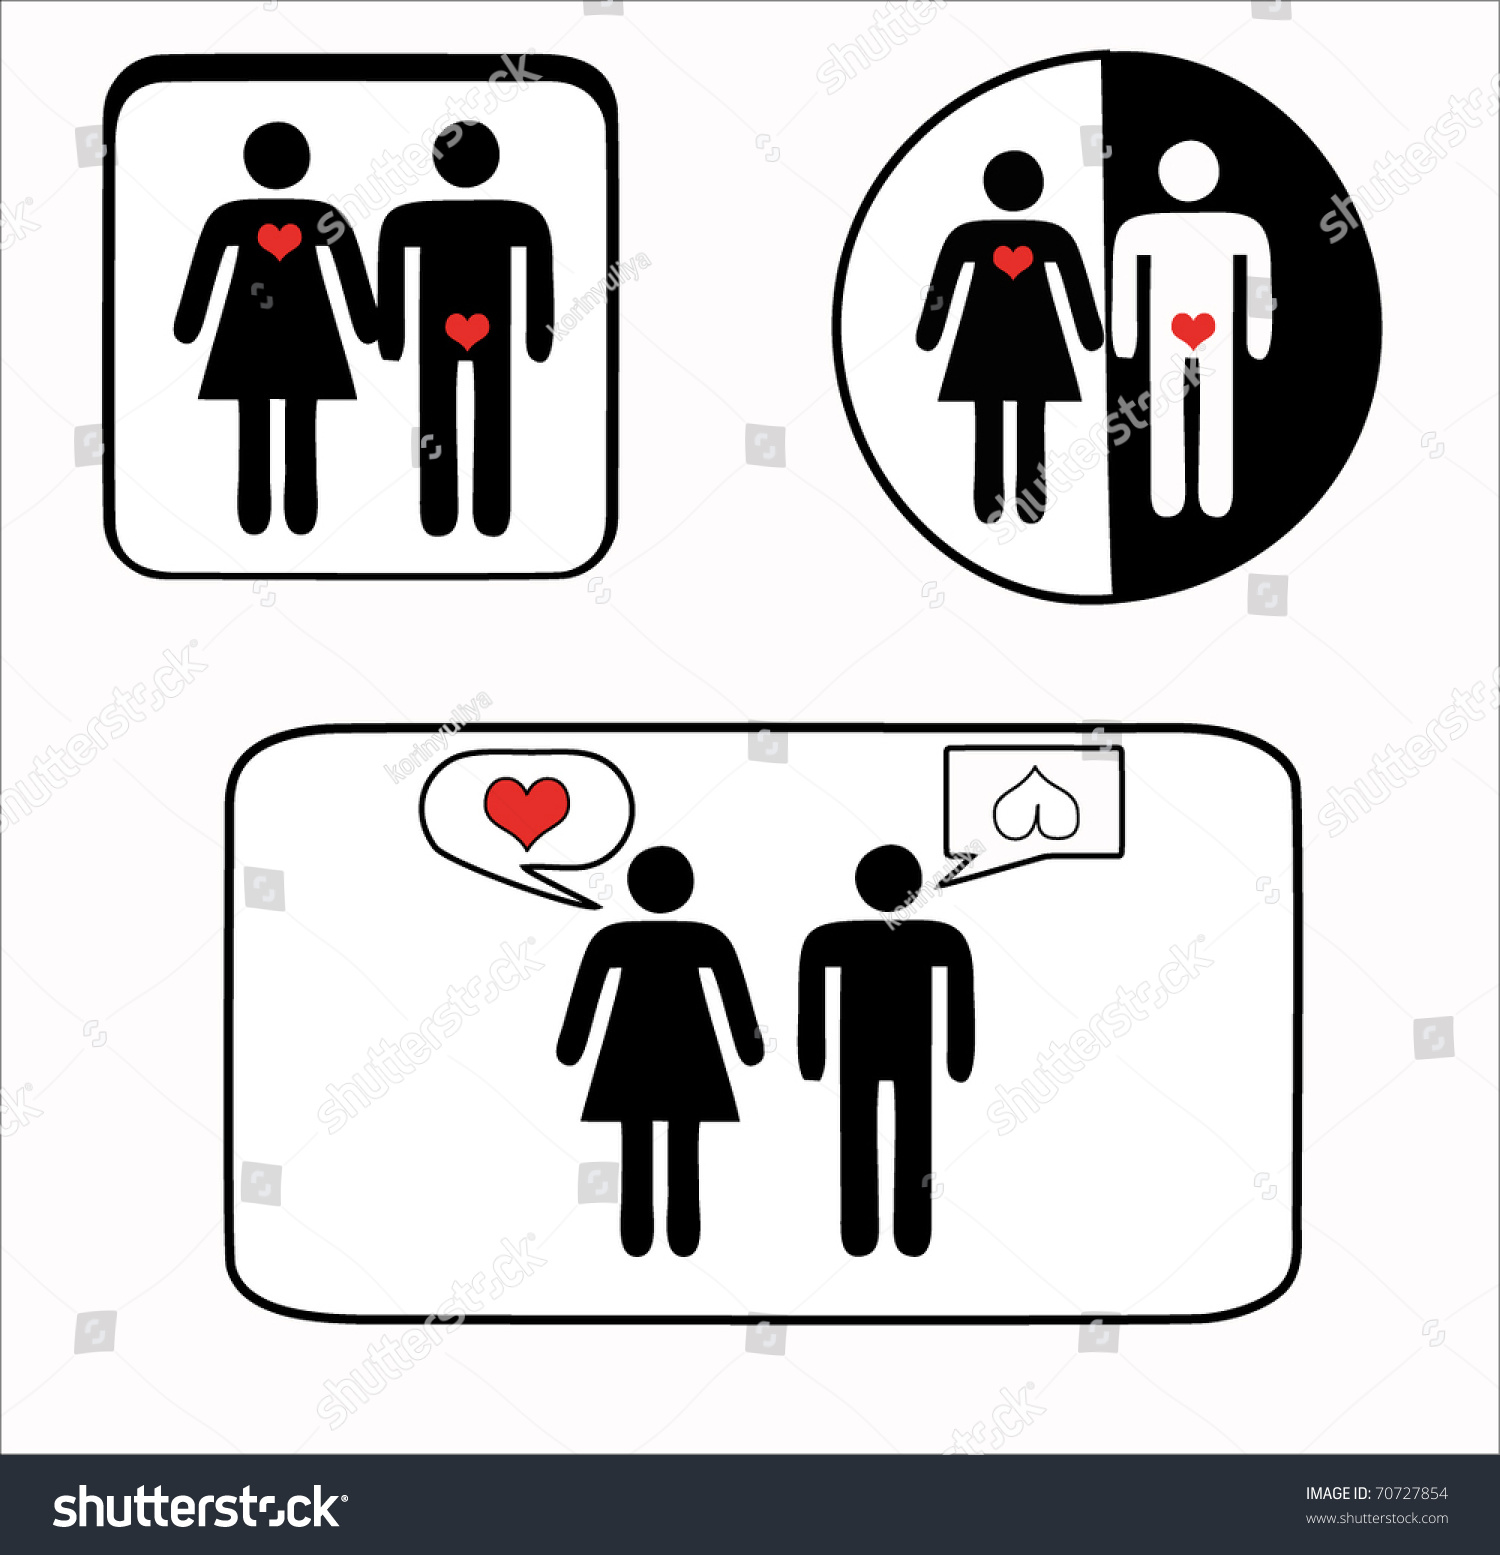 Icon Man And Woman Stock Vector Illustration 70727854 Shutterstock